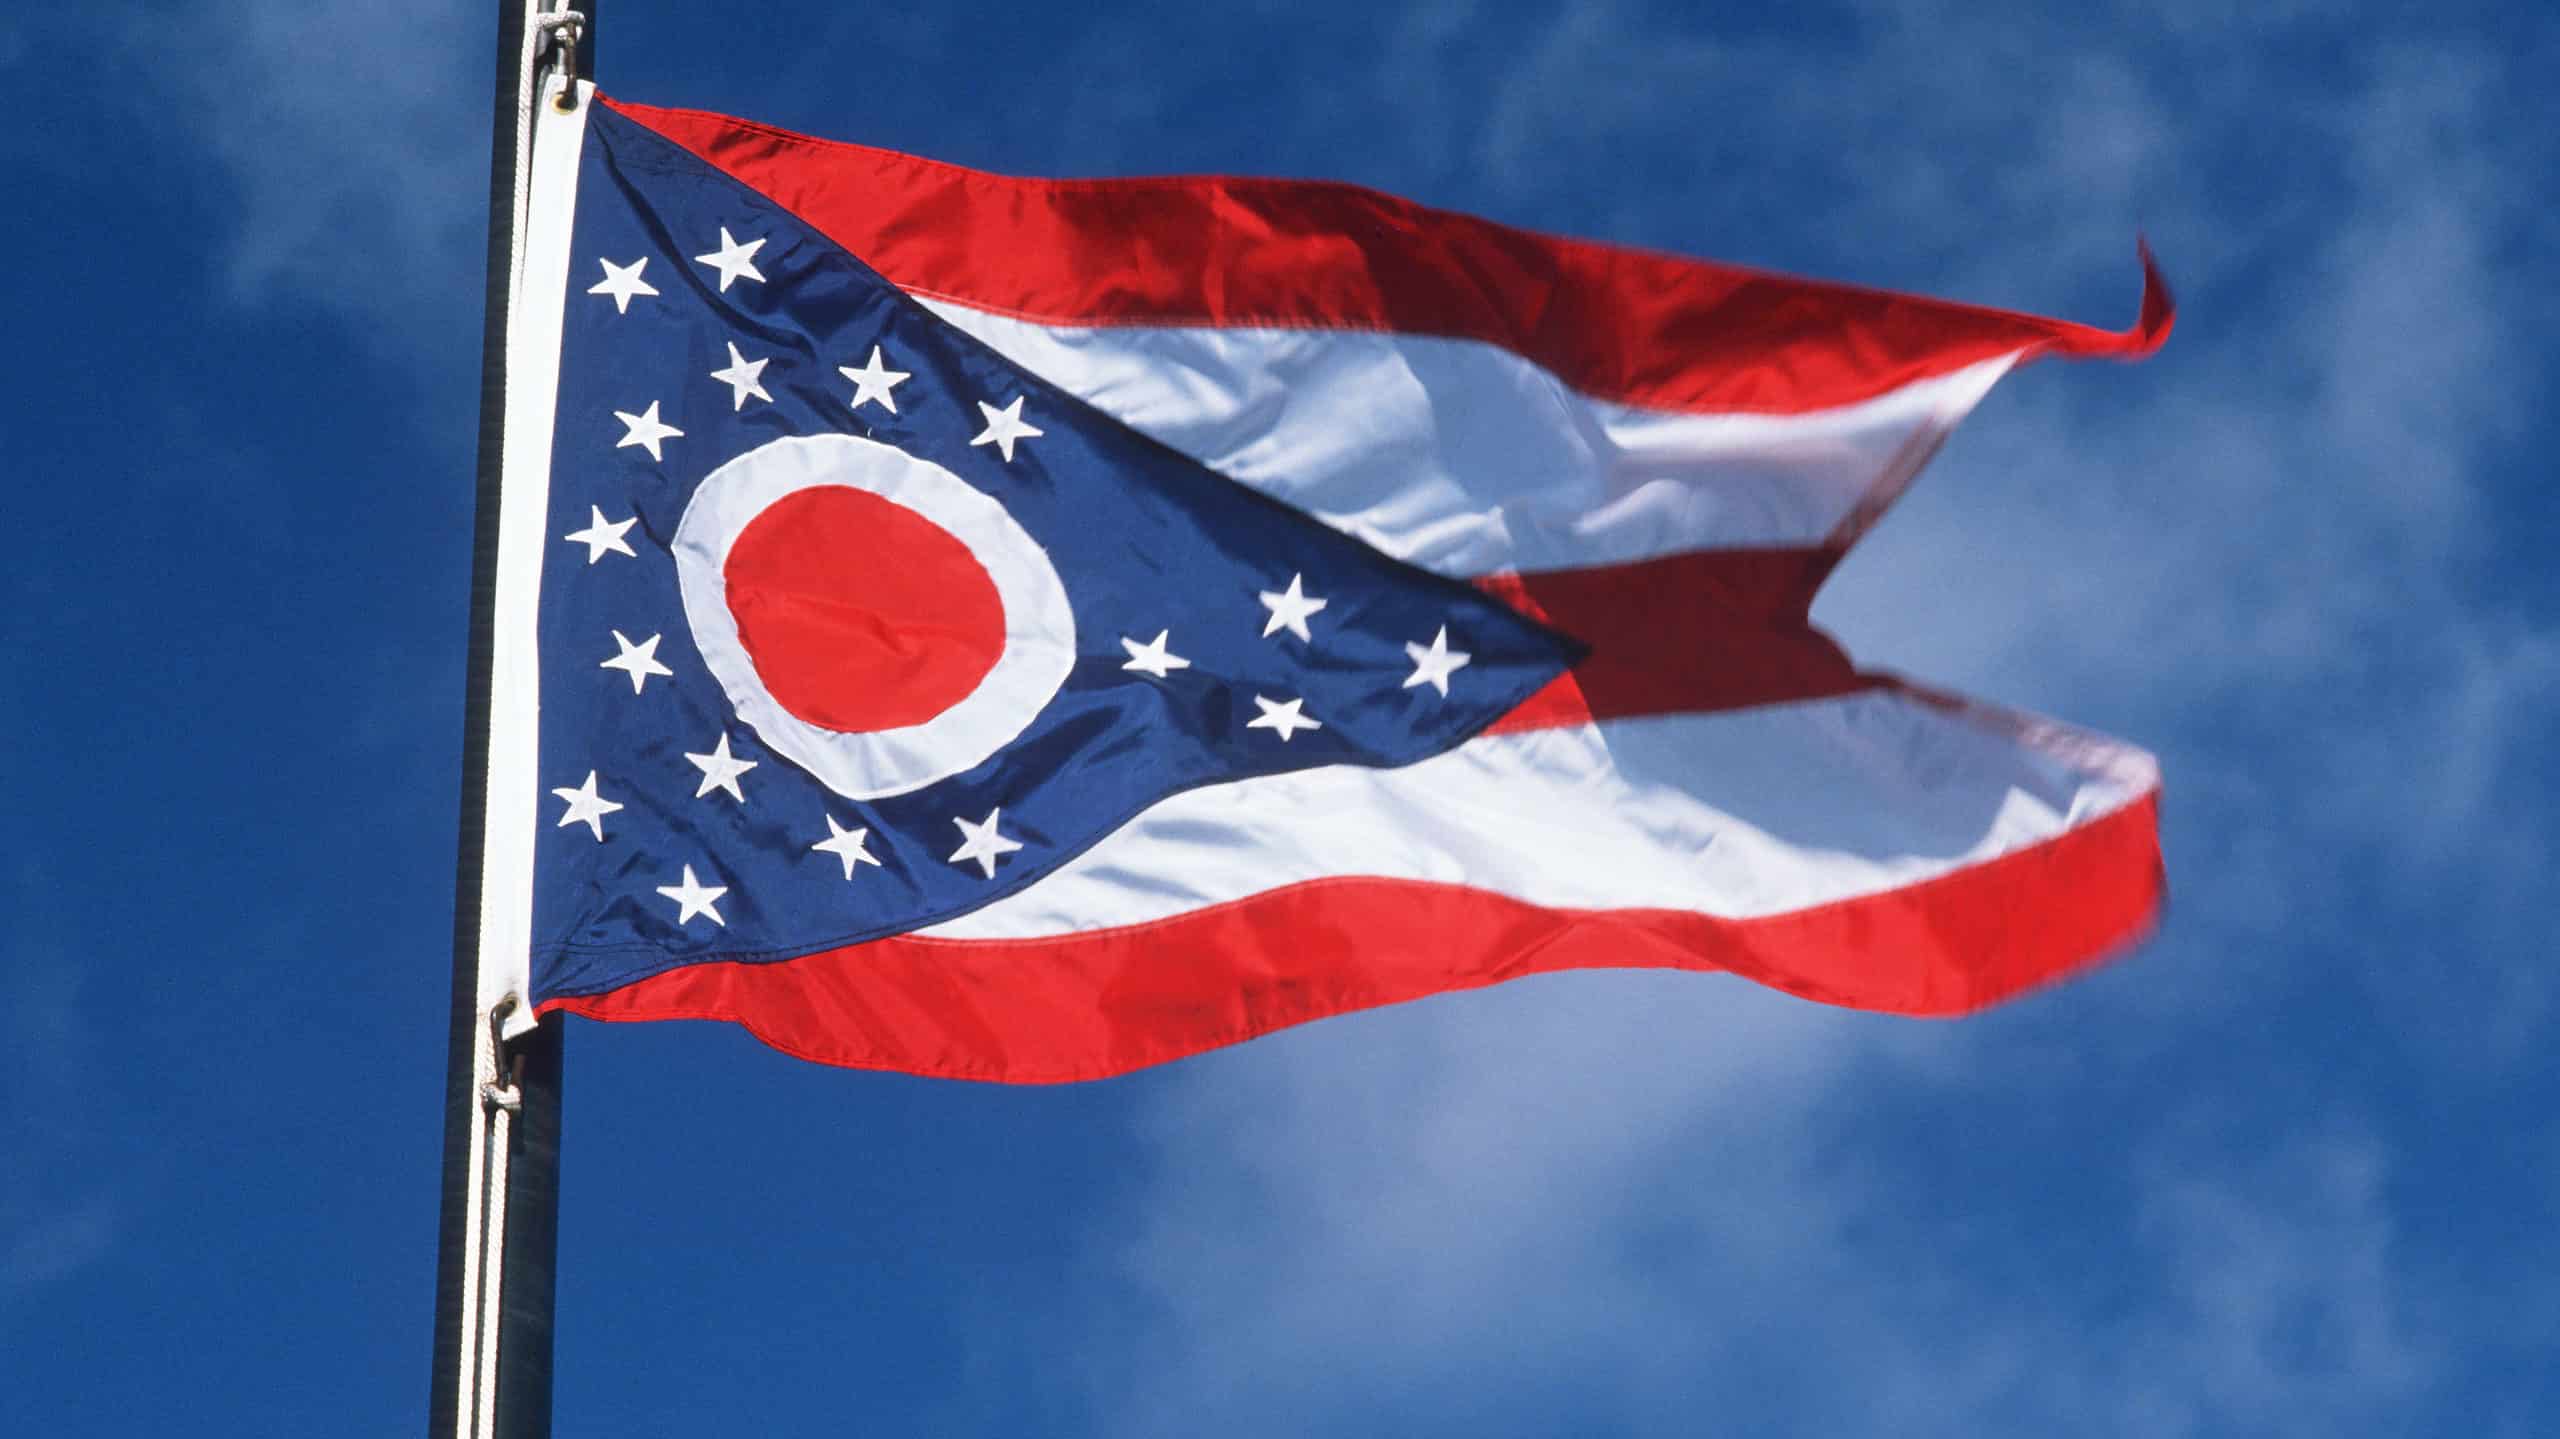 State flag of Ohio waving in the wind